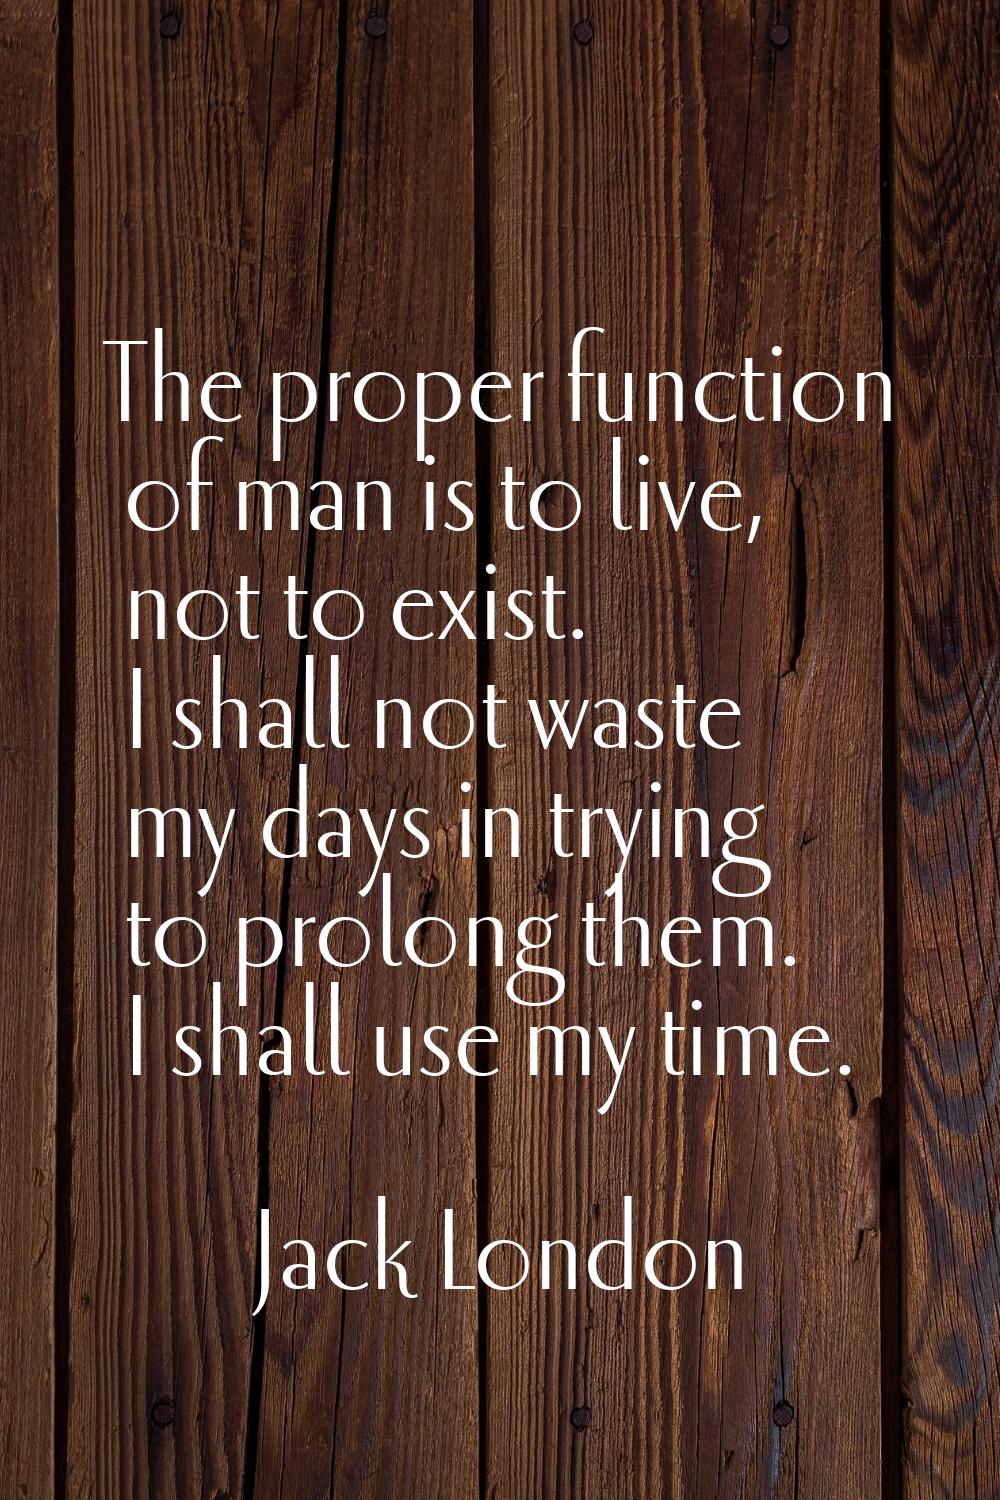 The proper function of man is to live, not to exist. I shall not waste my days in trying to prolong